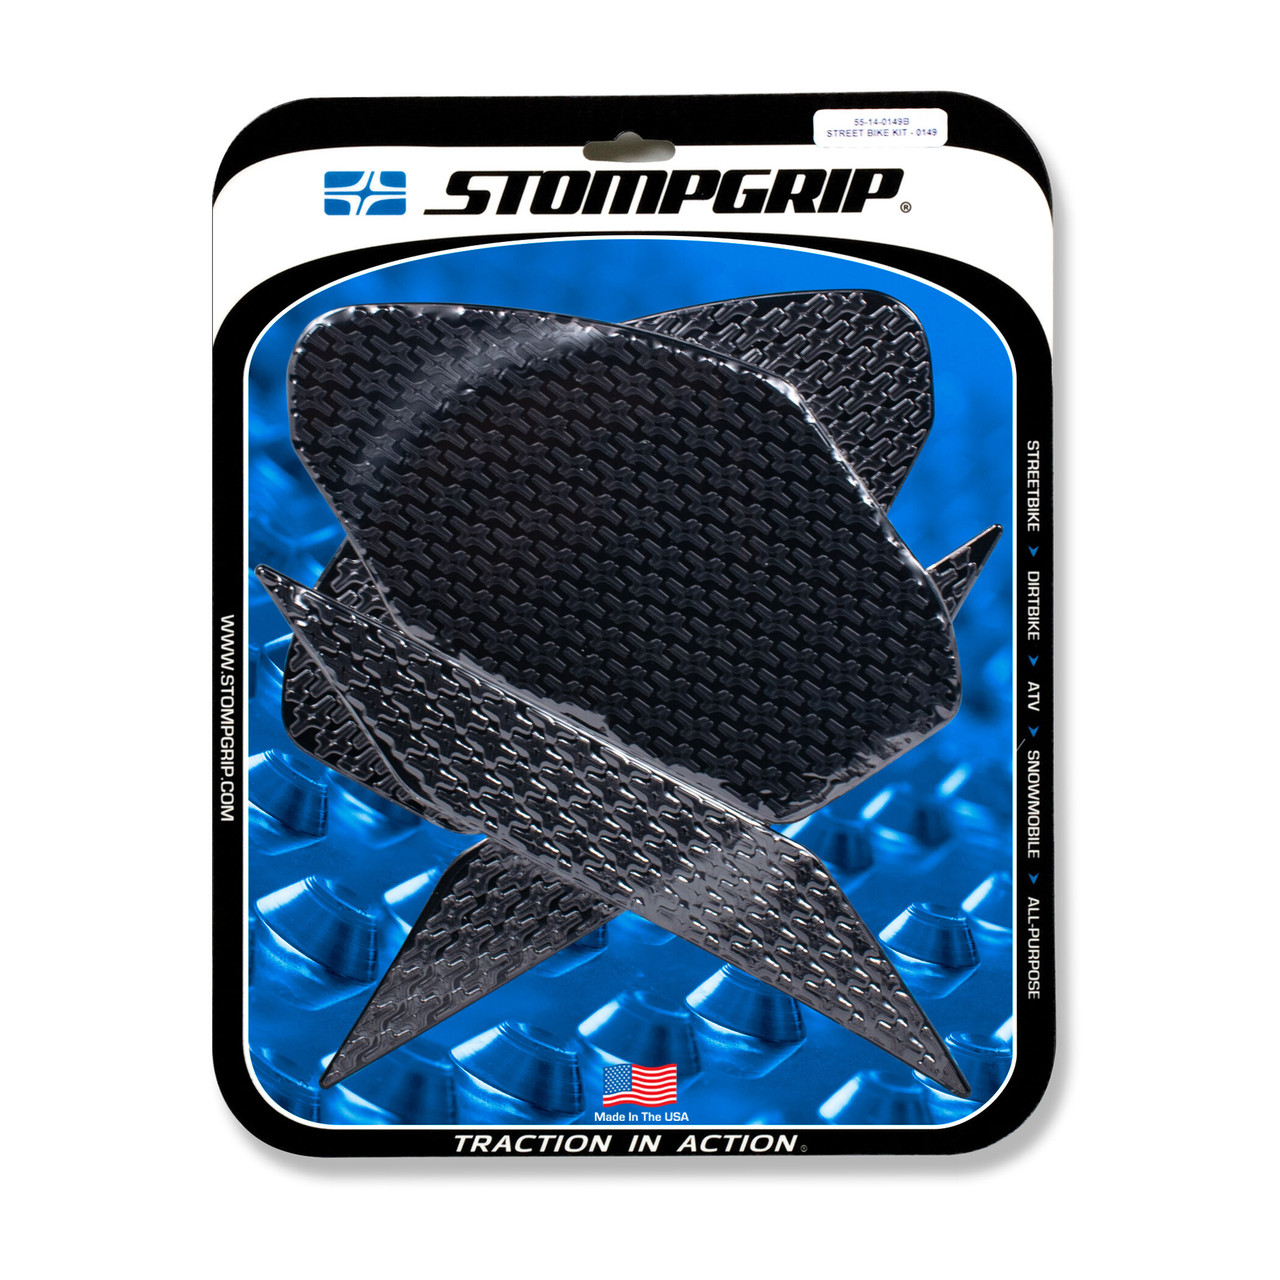 Stompgrip New Street Traction Pad, 655-13018B